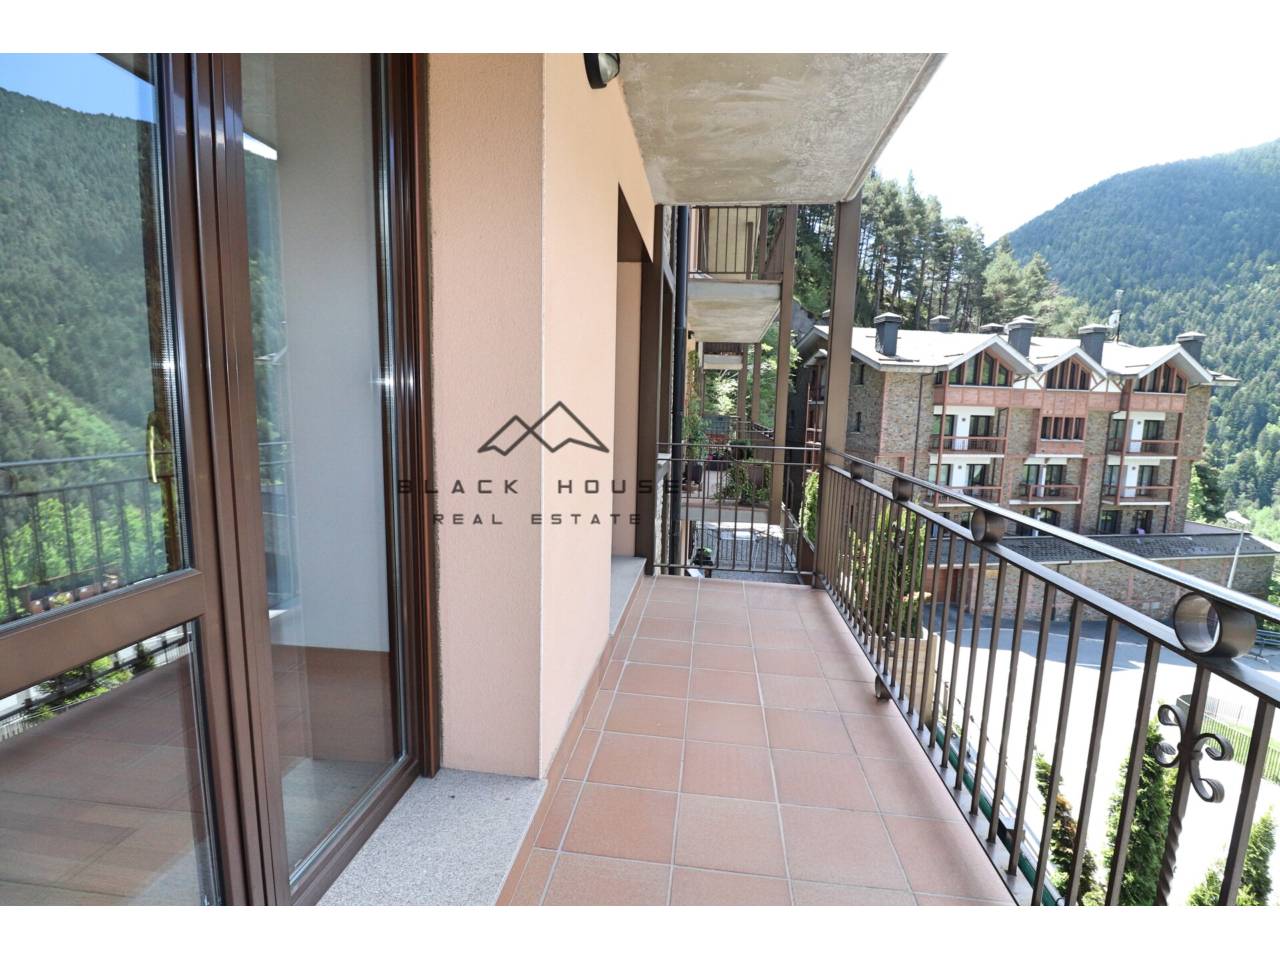 Apartment for sale in a residential area of Arinsal.